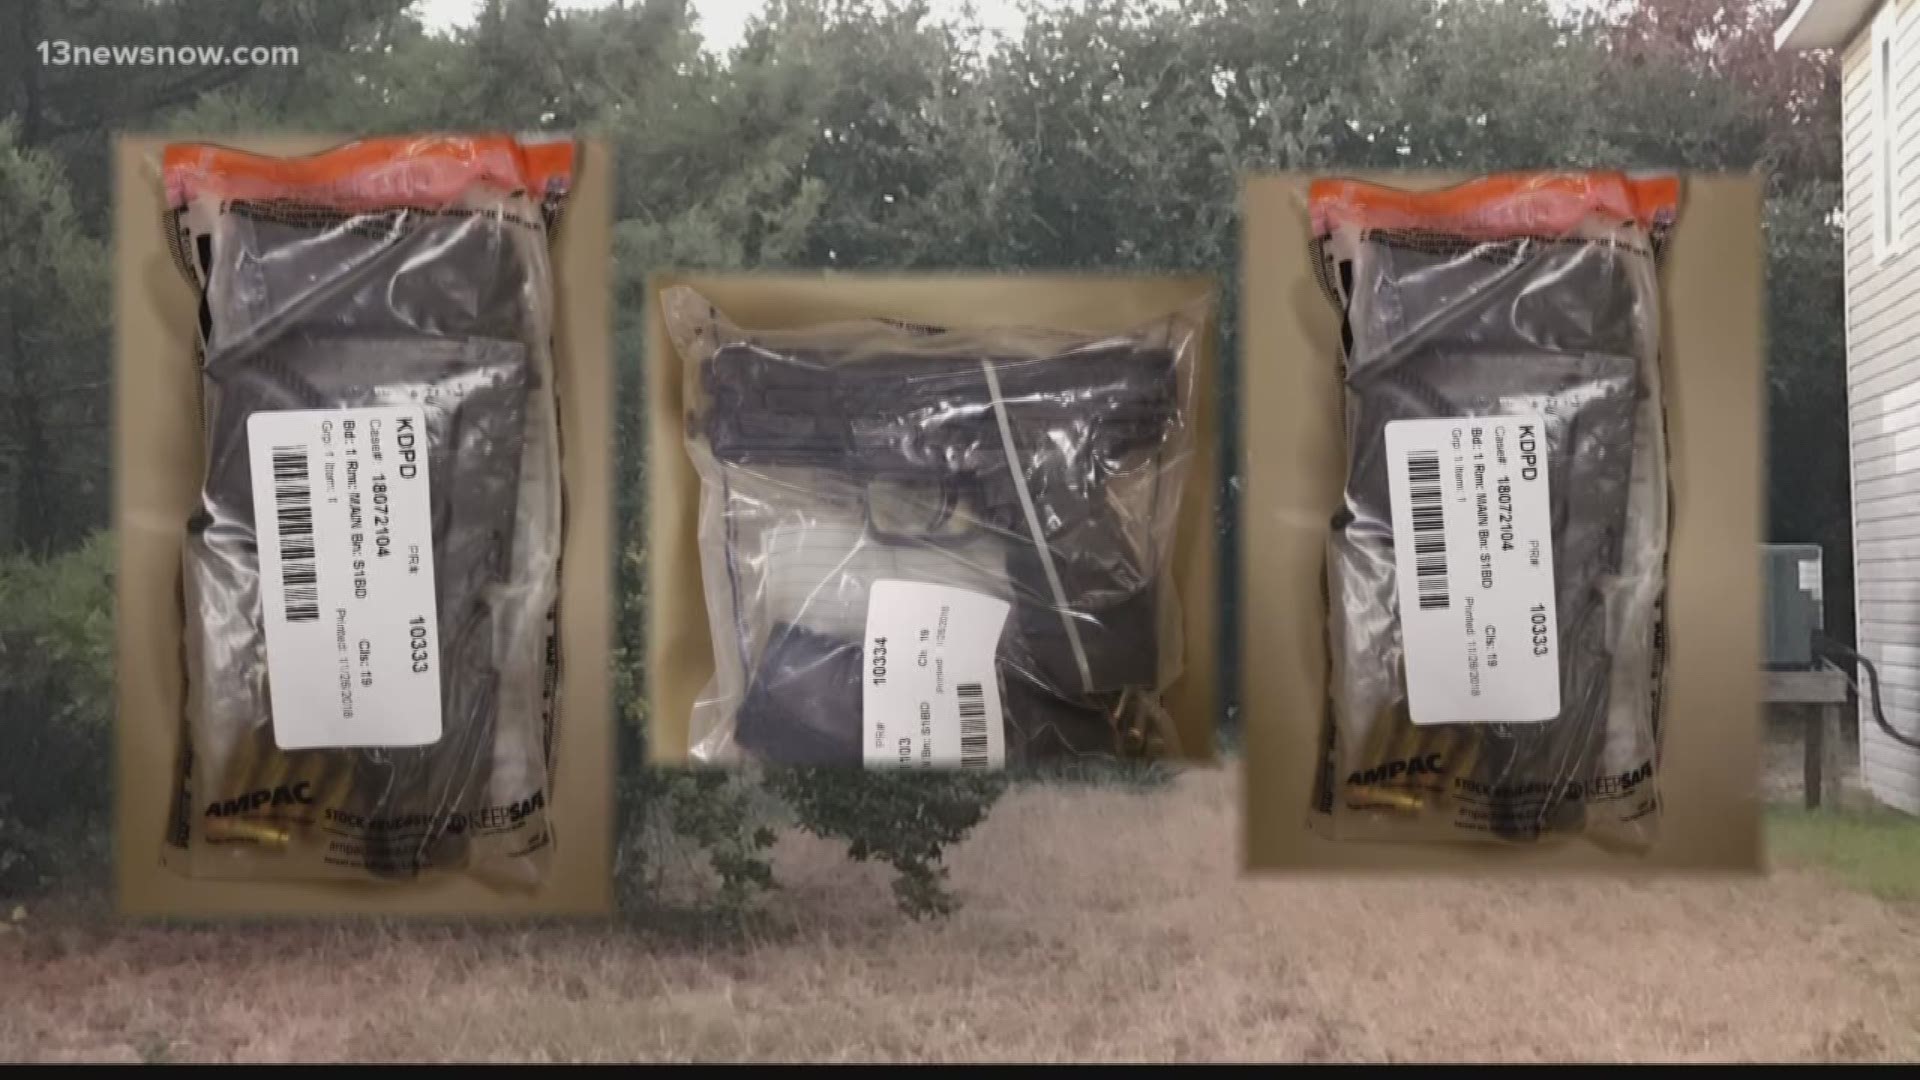 A group of kids in Kill Devil Hills found a backpack with three guns in the woods near Camilla Drive.